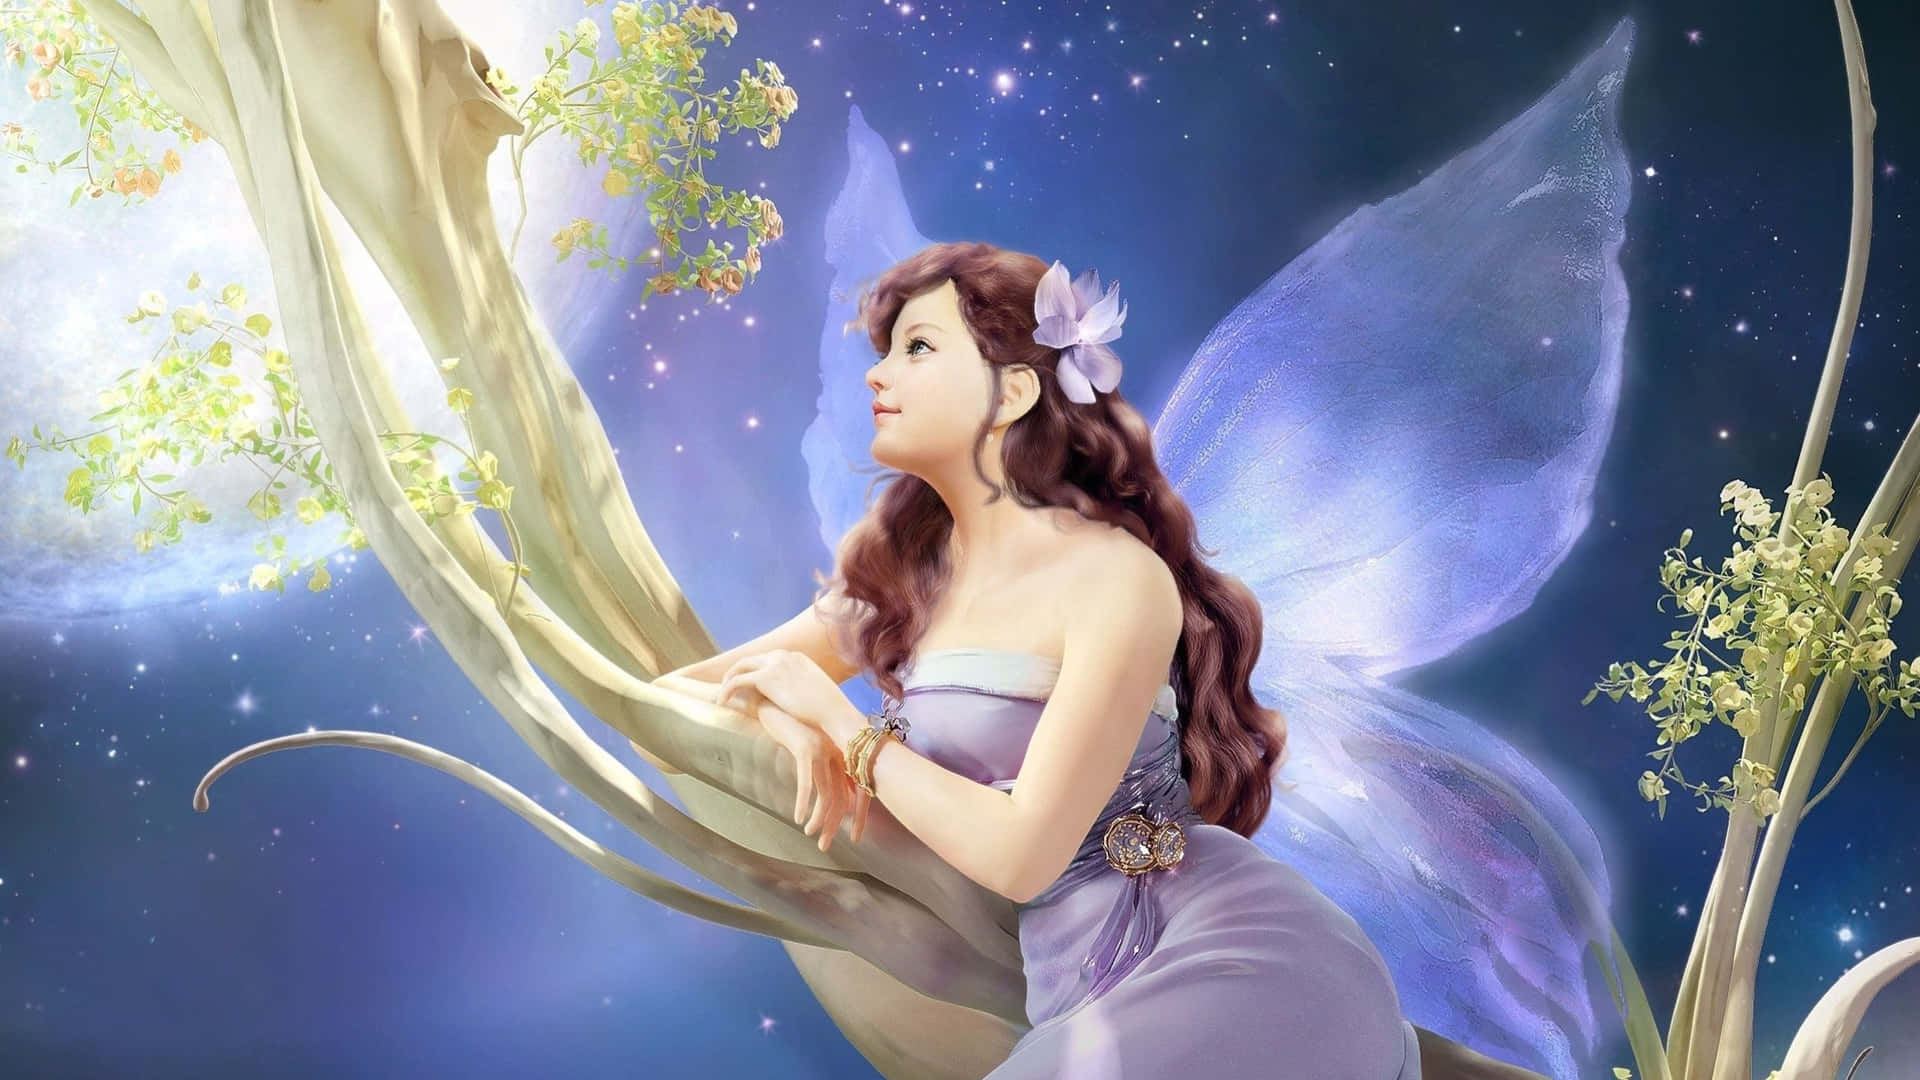 "A fairy gazes into the night sky, dreaming of a new adventure"